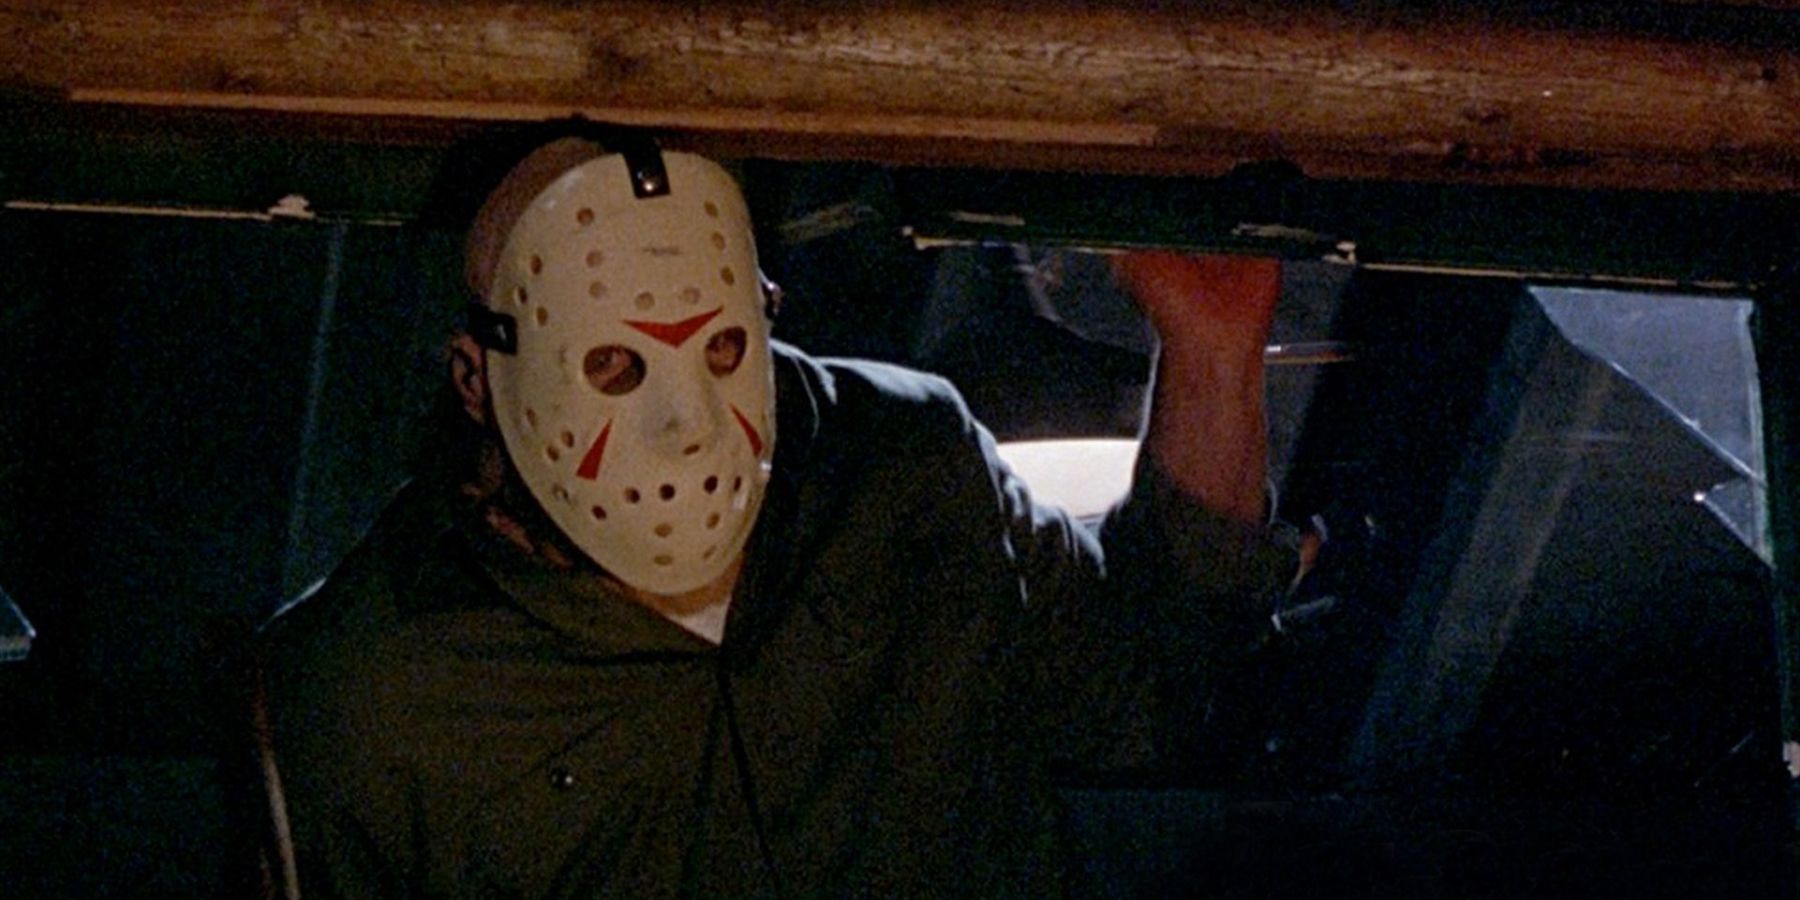 Jason Voorhees emerging through a window Friday the 13th Part 3 (1982)